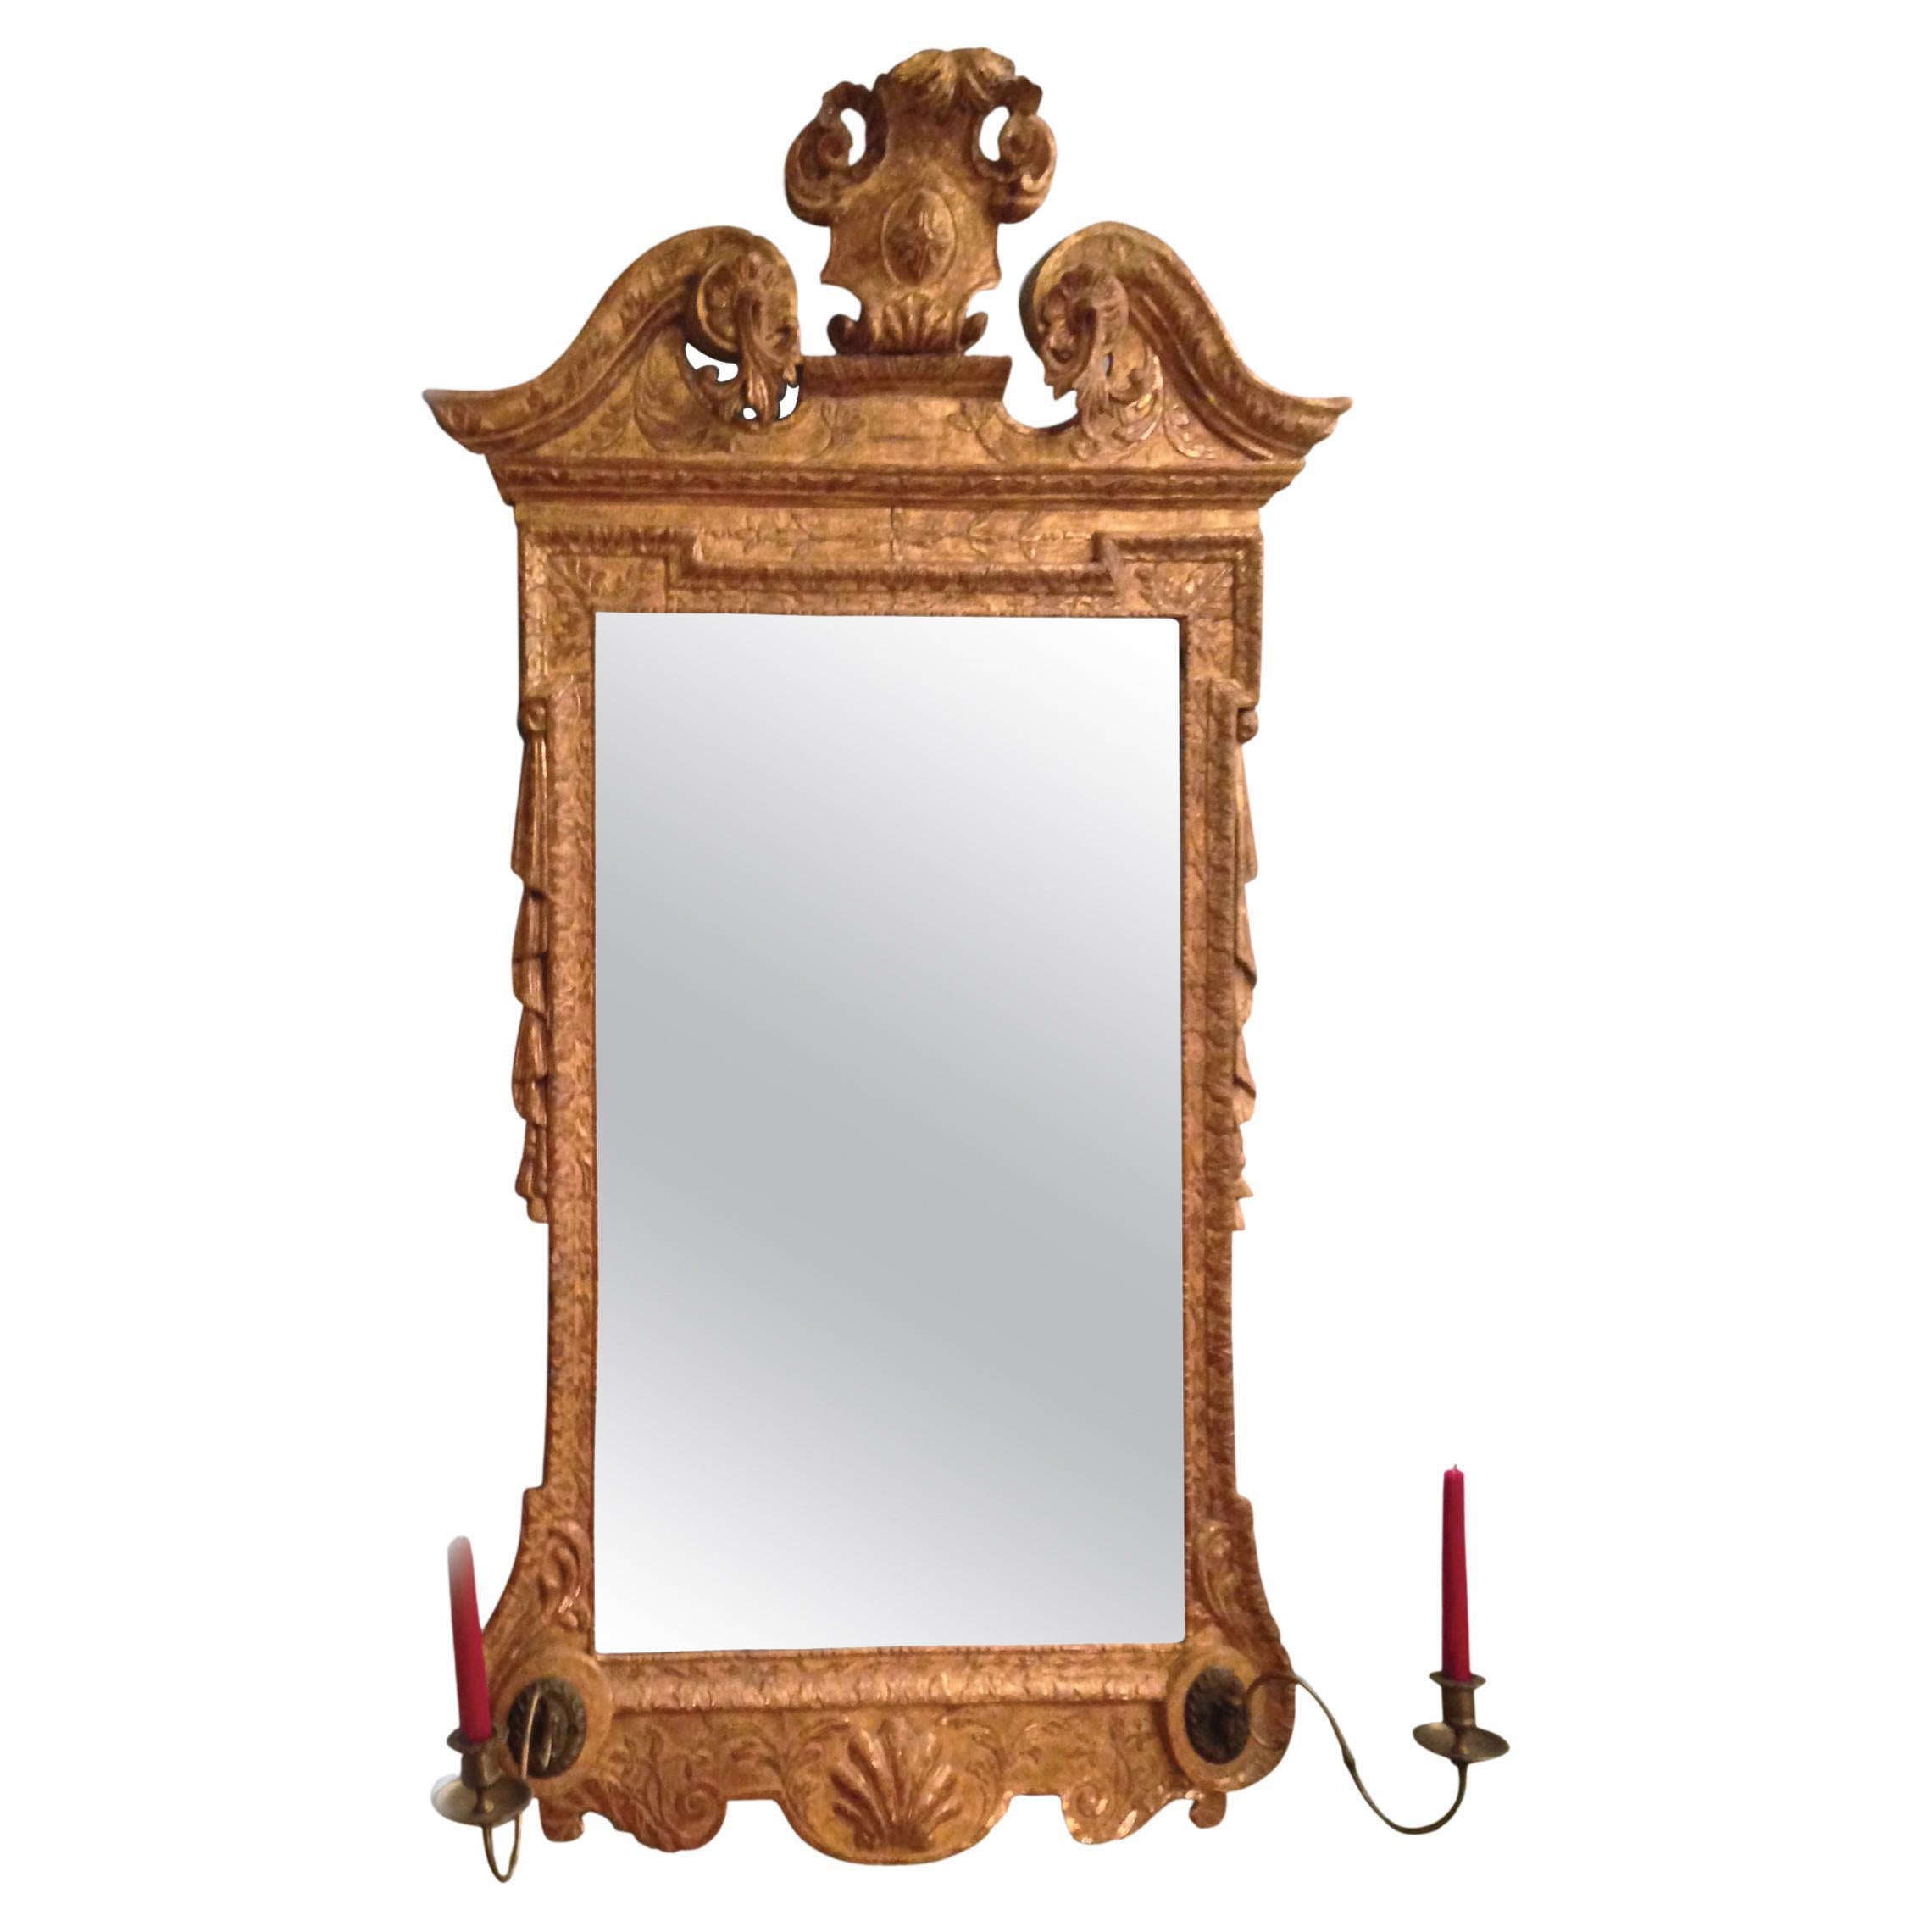 Early 18th Century George II Period Gilt Gesso Mirror For Sale